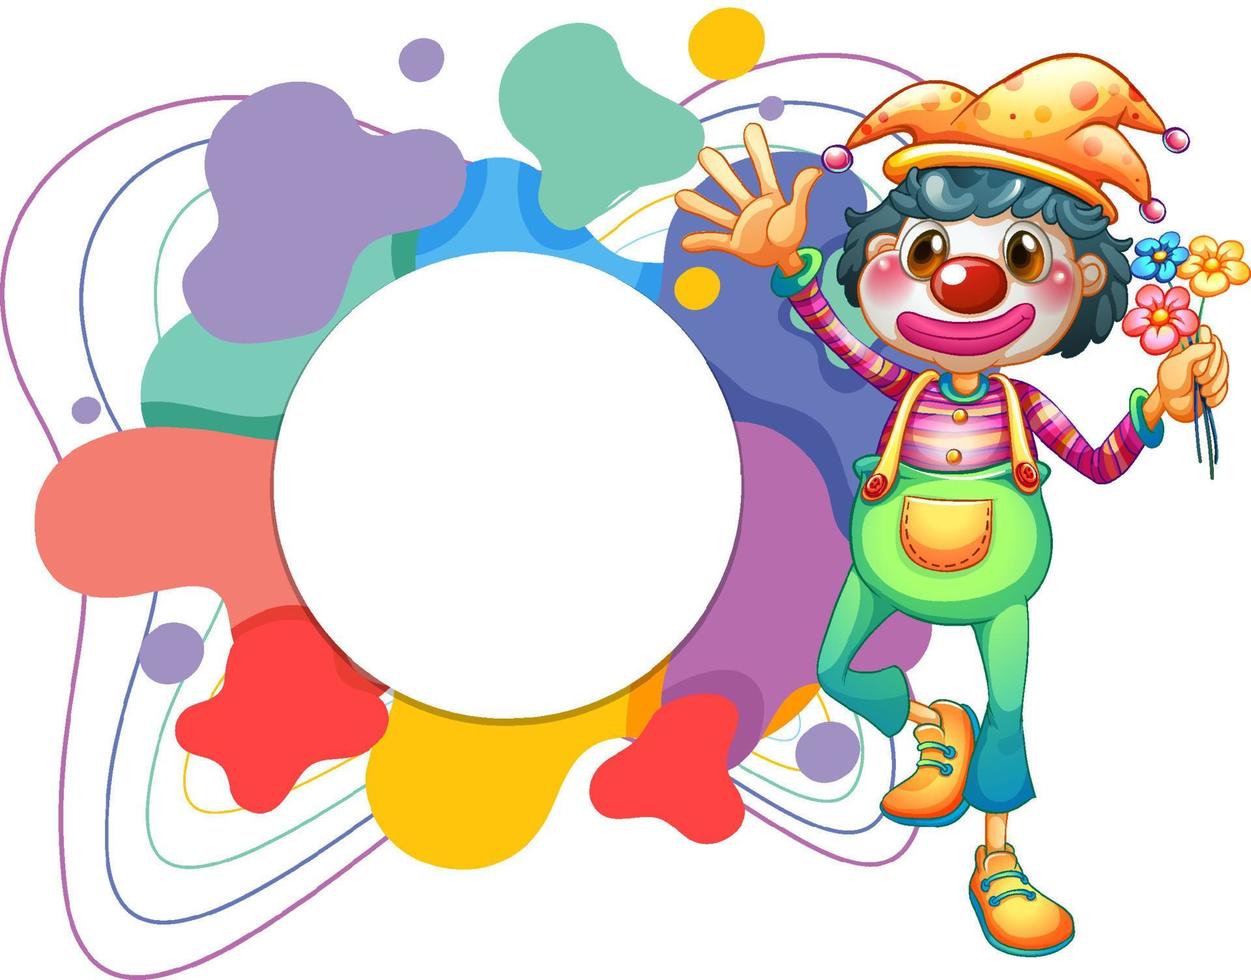 Cute clown with blank colouful frame banner vector